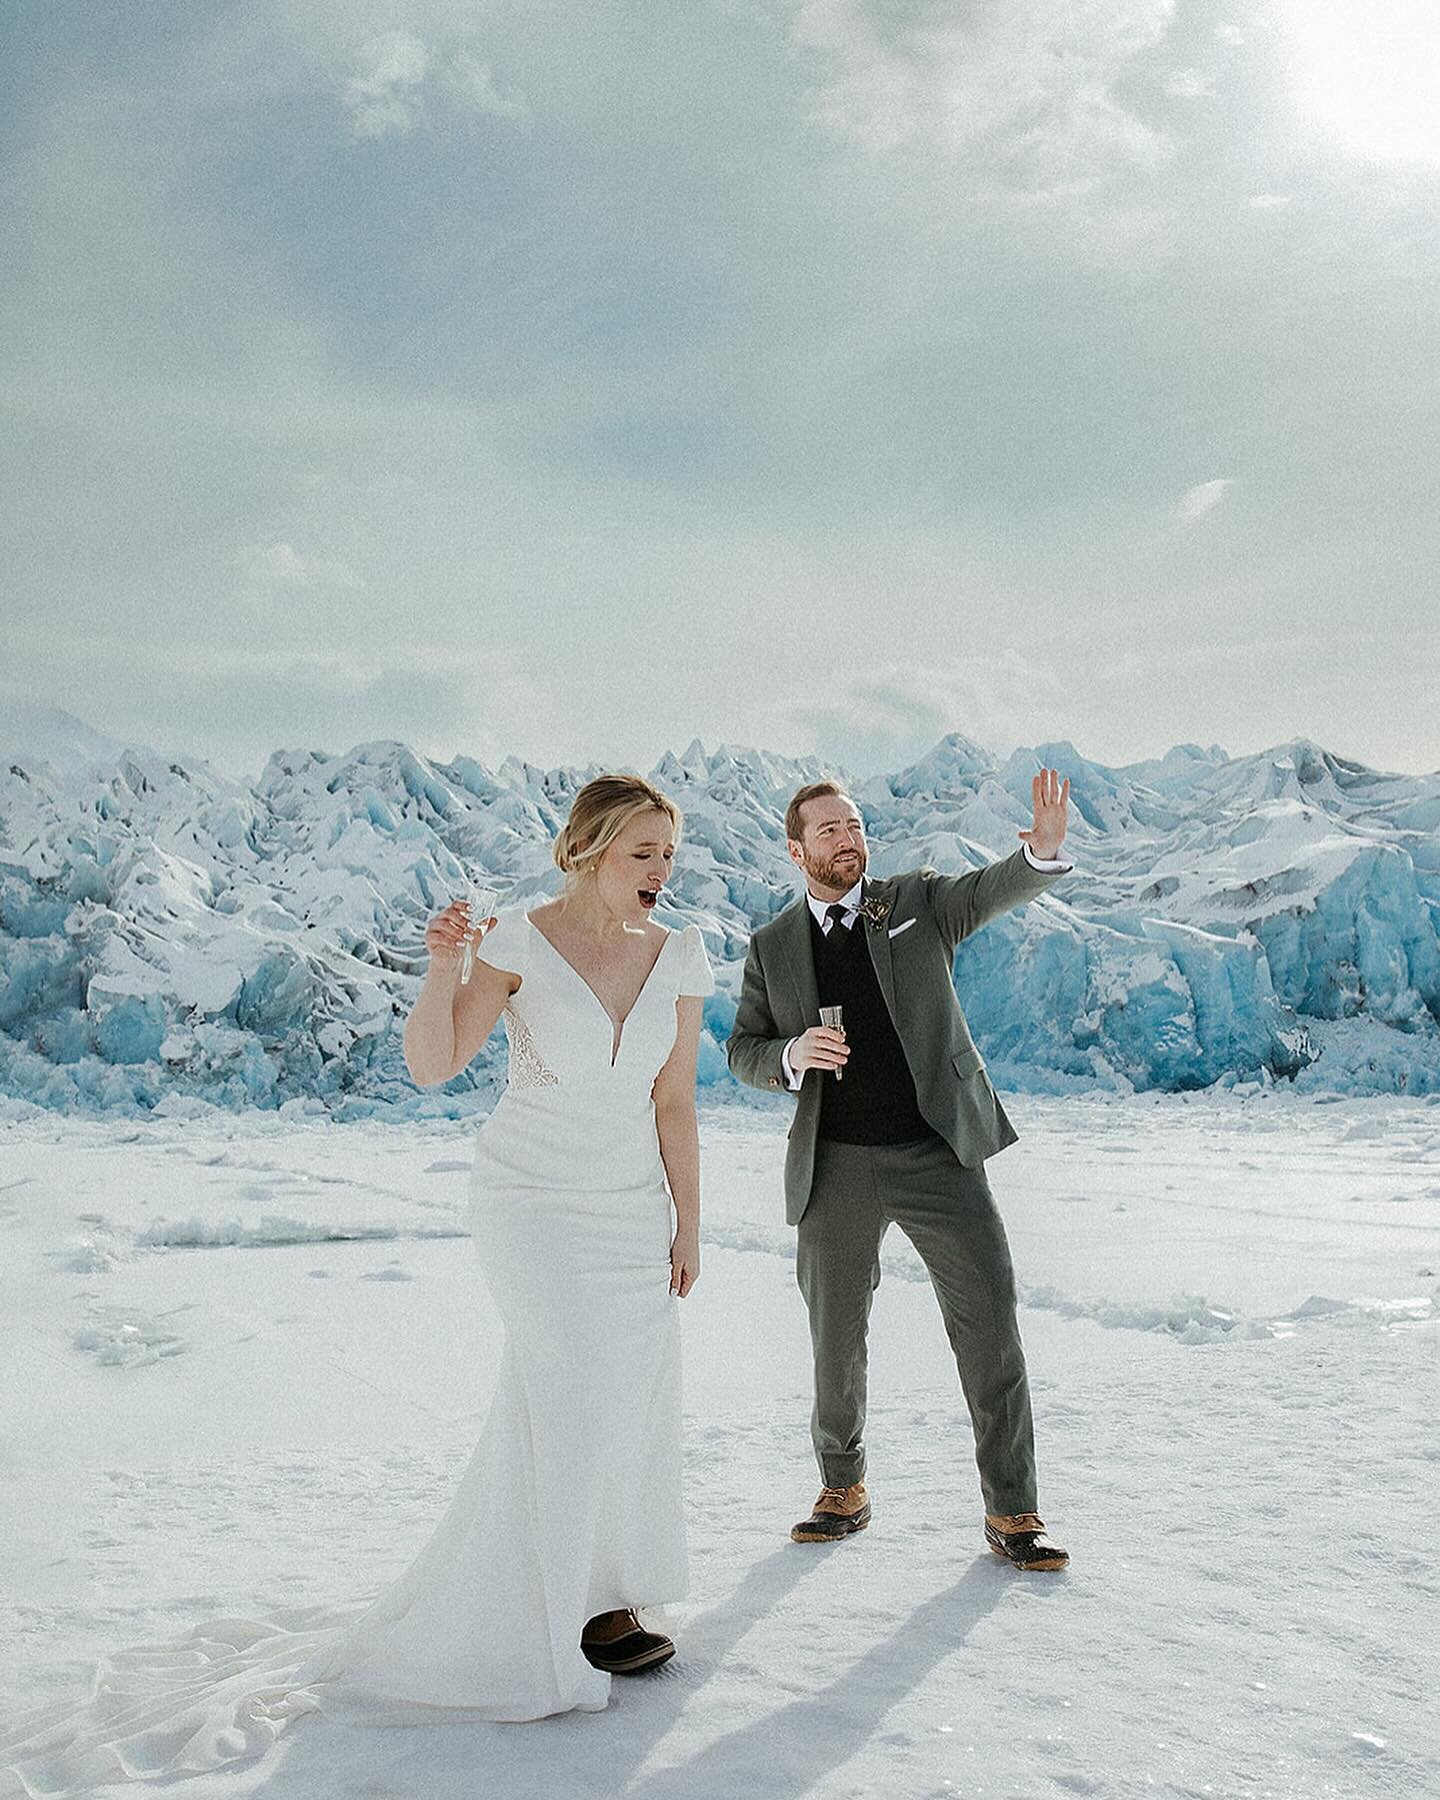 AN ALASKAN ADVENTURE

If you&rsquo;re traveling to Alaska for your elopement, getting married on a glacier is one of the best ways to experience this wild, unique state! Being on top of a glacier is an experience that you can&rsquo;t get in many othe